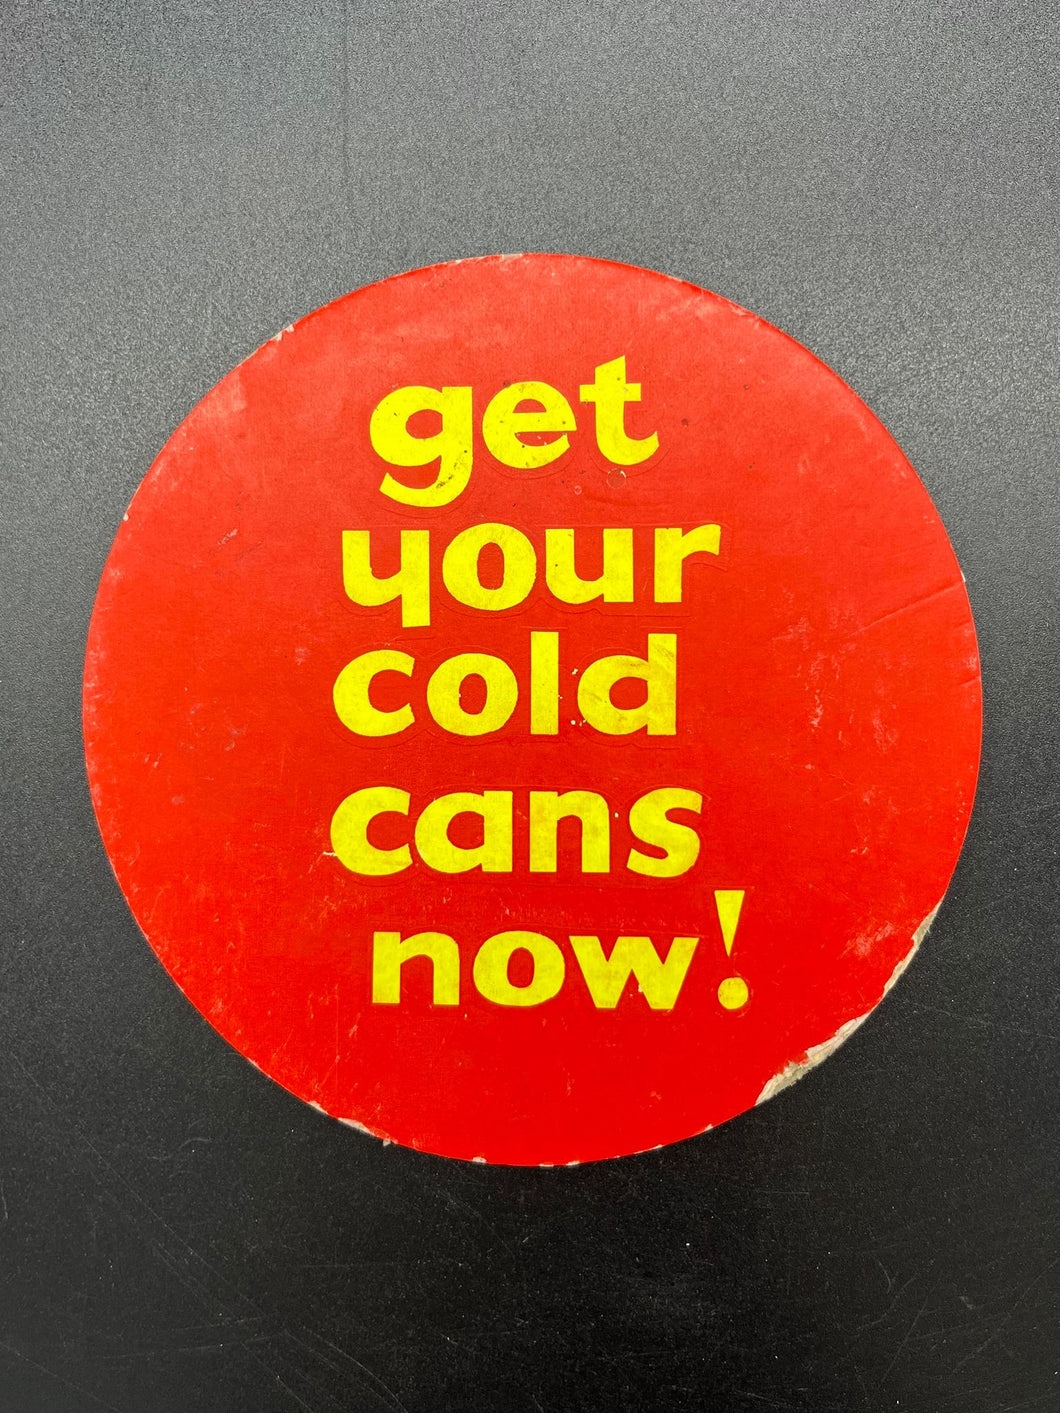 22) Original 'Get Your Cold Cans Now' Cardboard Advertisement